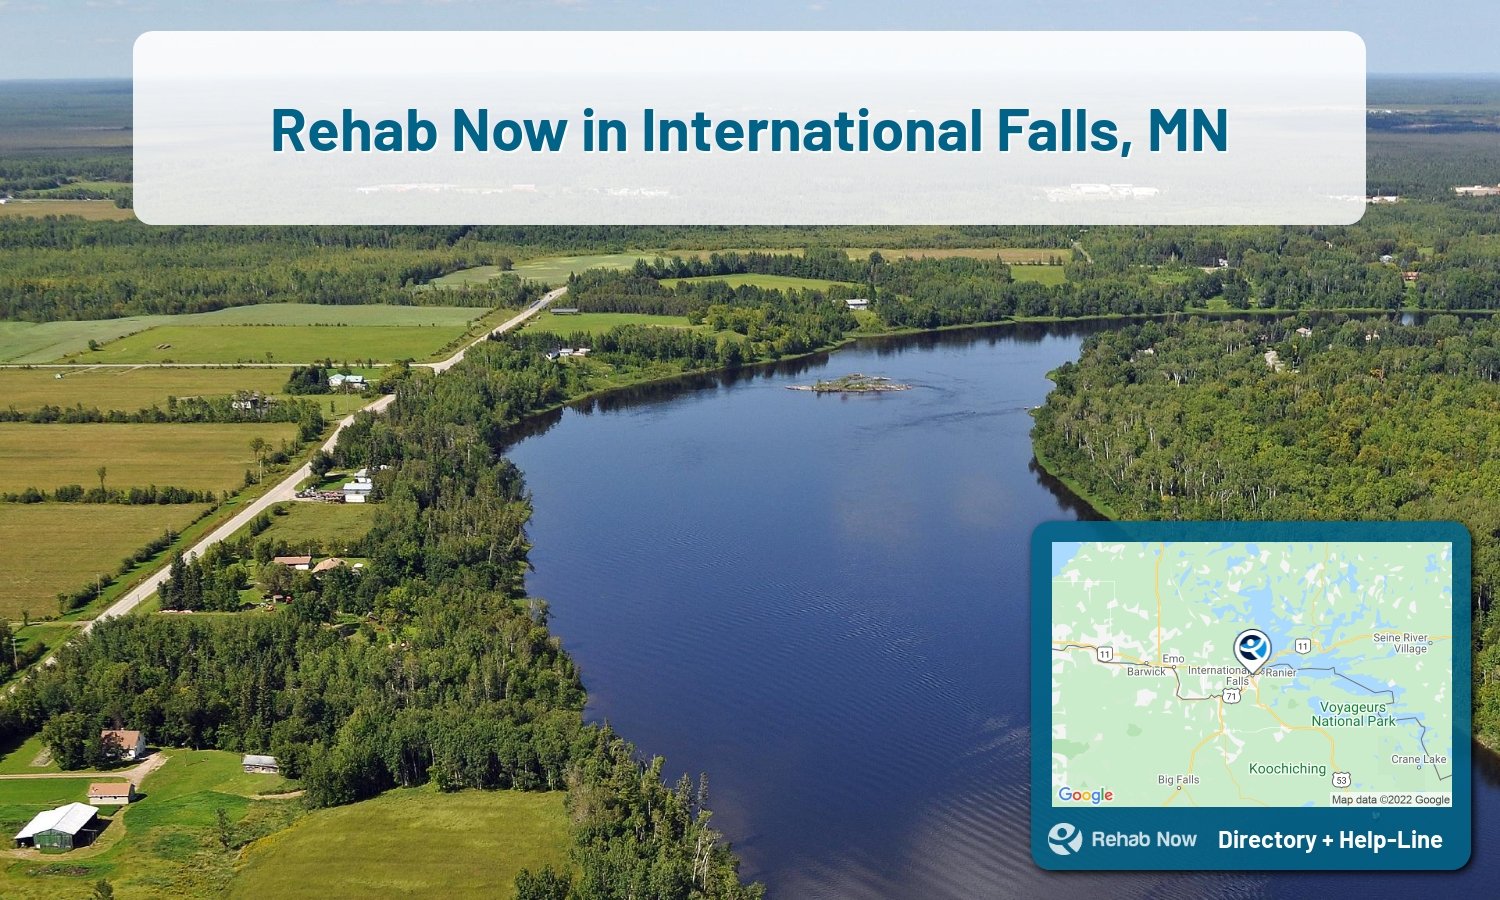 List of alcohol and drug treatment centers near you in International Falls, Minnesota. Research certifications, programs, methods, pricing, and more.